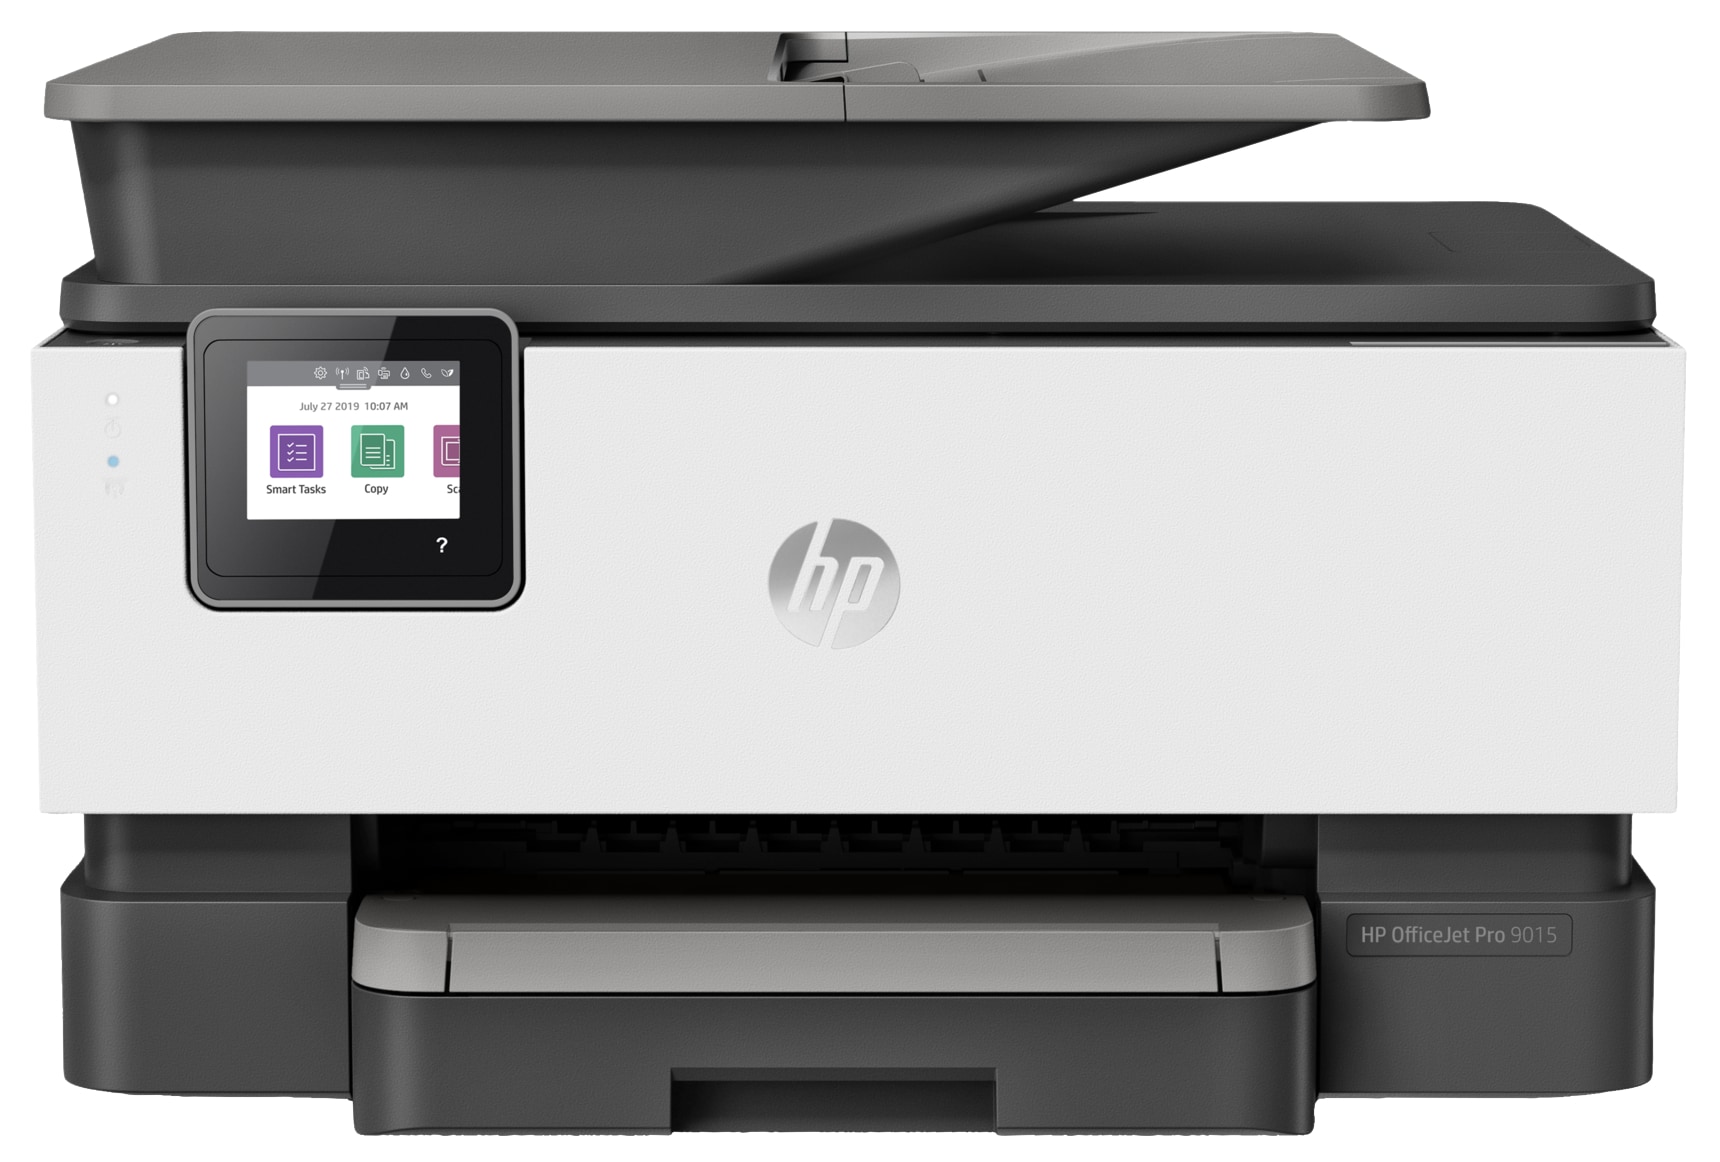 HP Officejet Pro 9015 All-in-One - multifunction printer - color - HP Insta